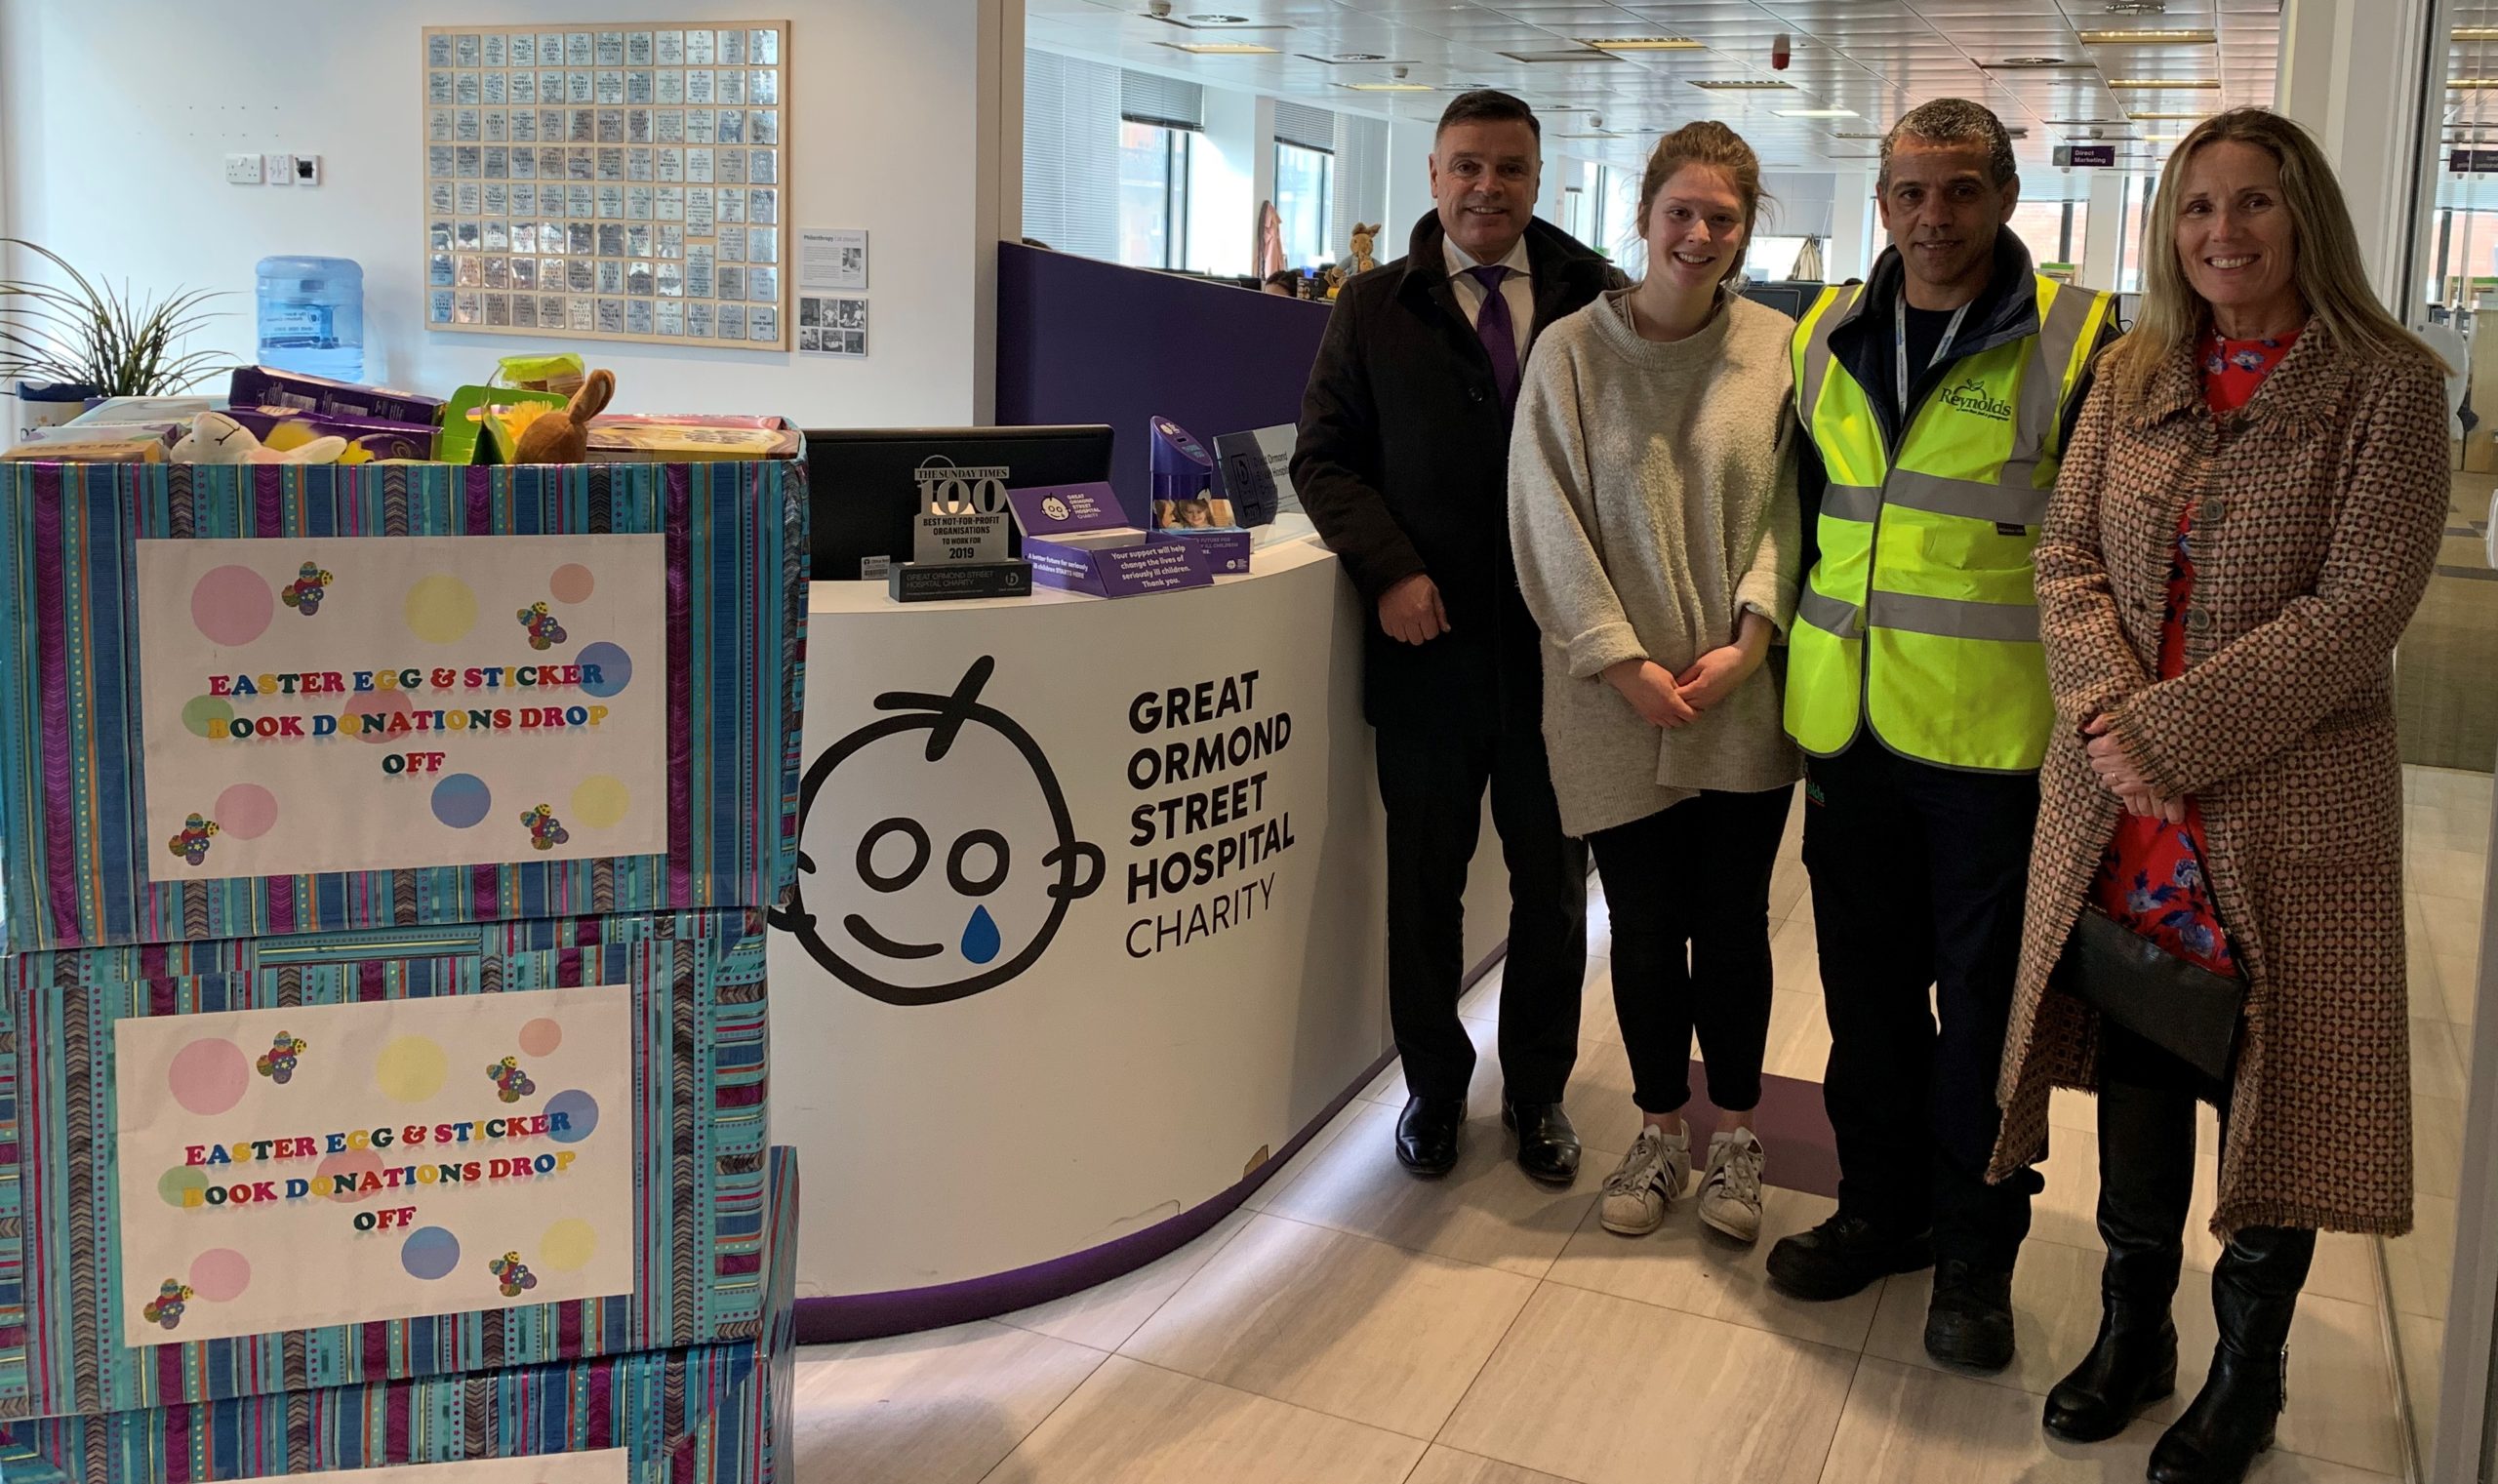 Reynolds delivers Easter treats to GOSH Charity Reynolds